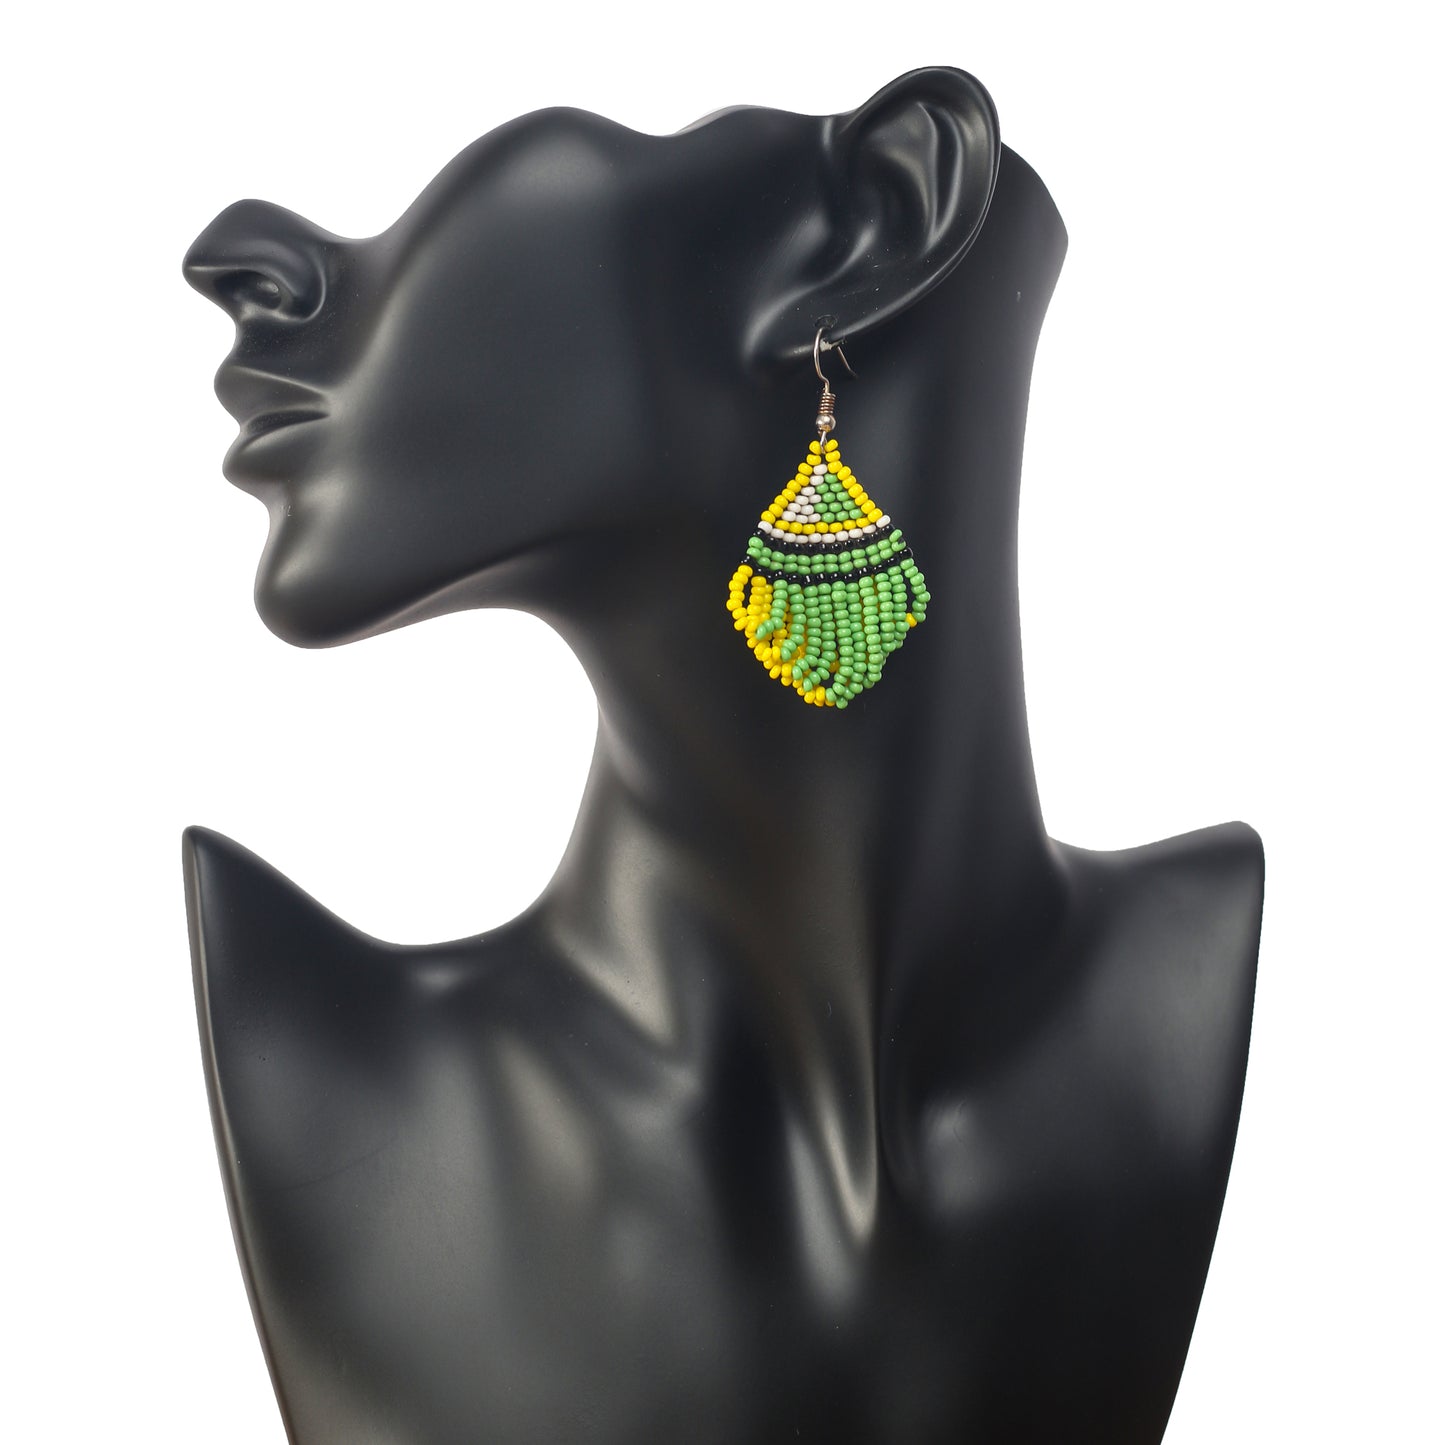 Green and yellow beaded earrings. The yellow beads are over laid with green beads. The white and black beads are used as accents. 